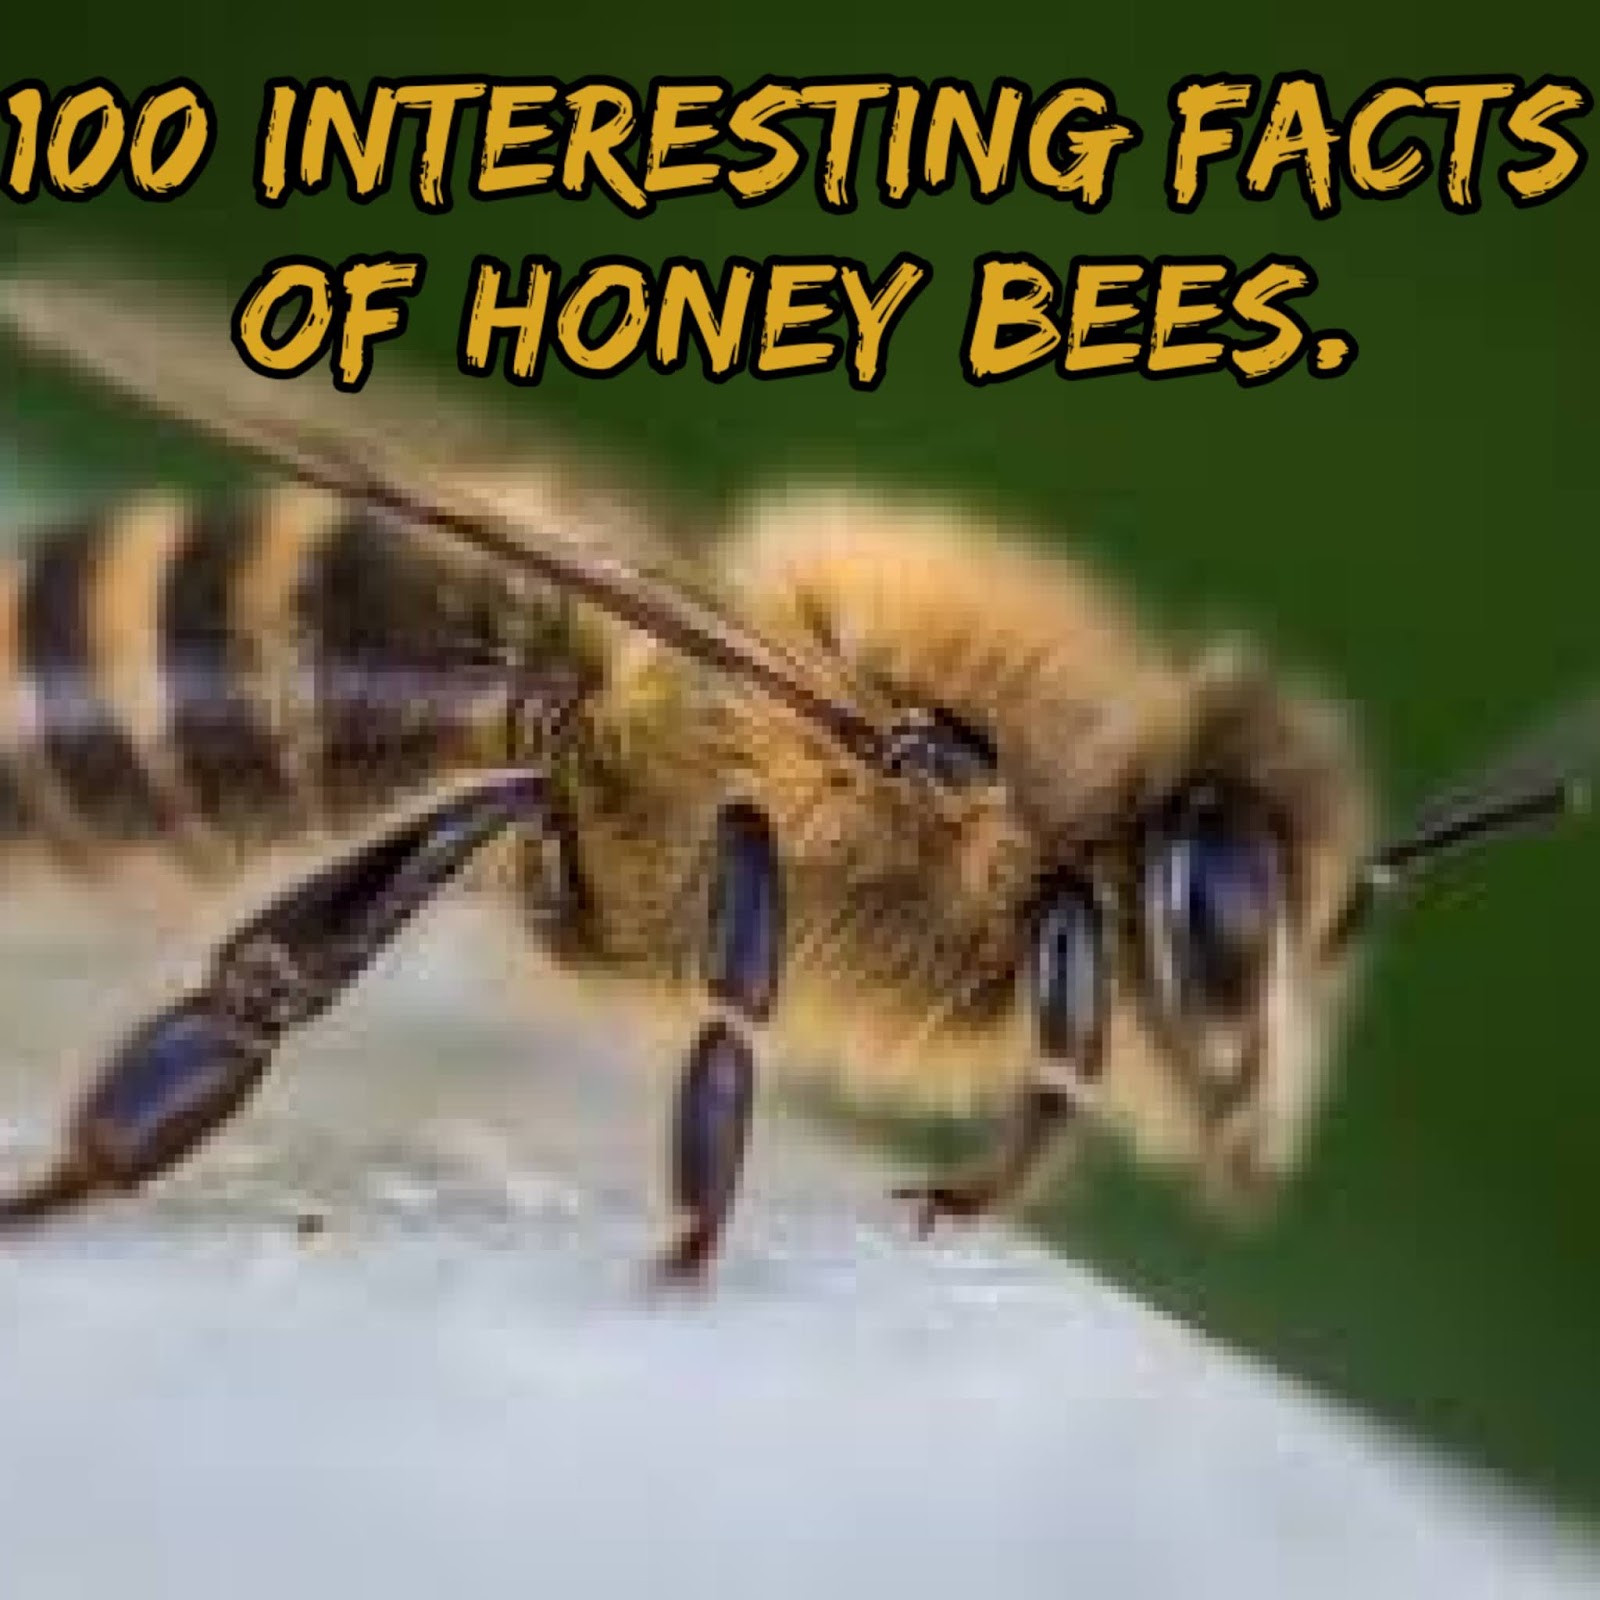 Interesting Facts About Honey Bees Infographic Honey - vrogue.co